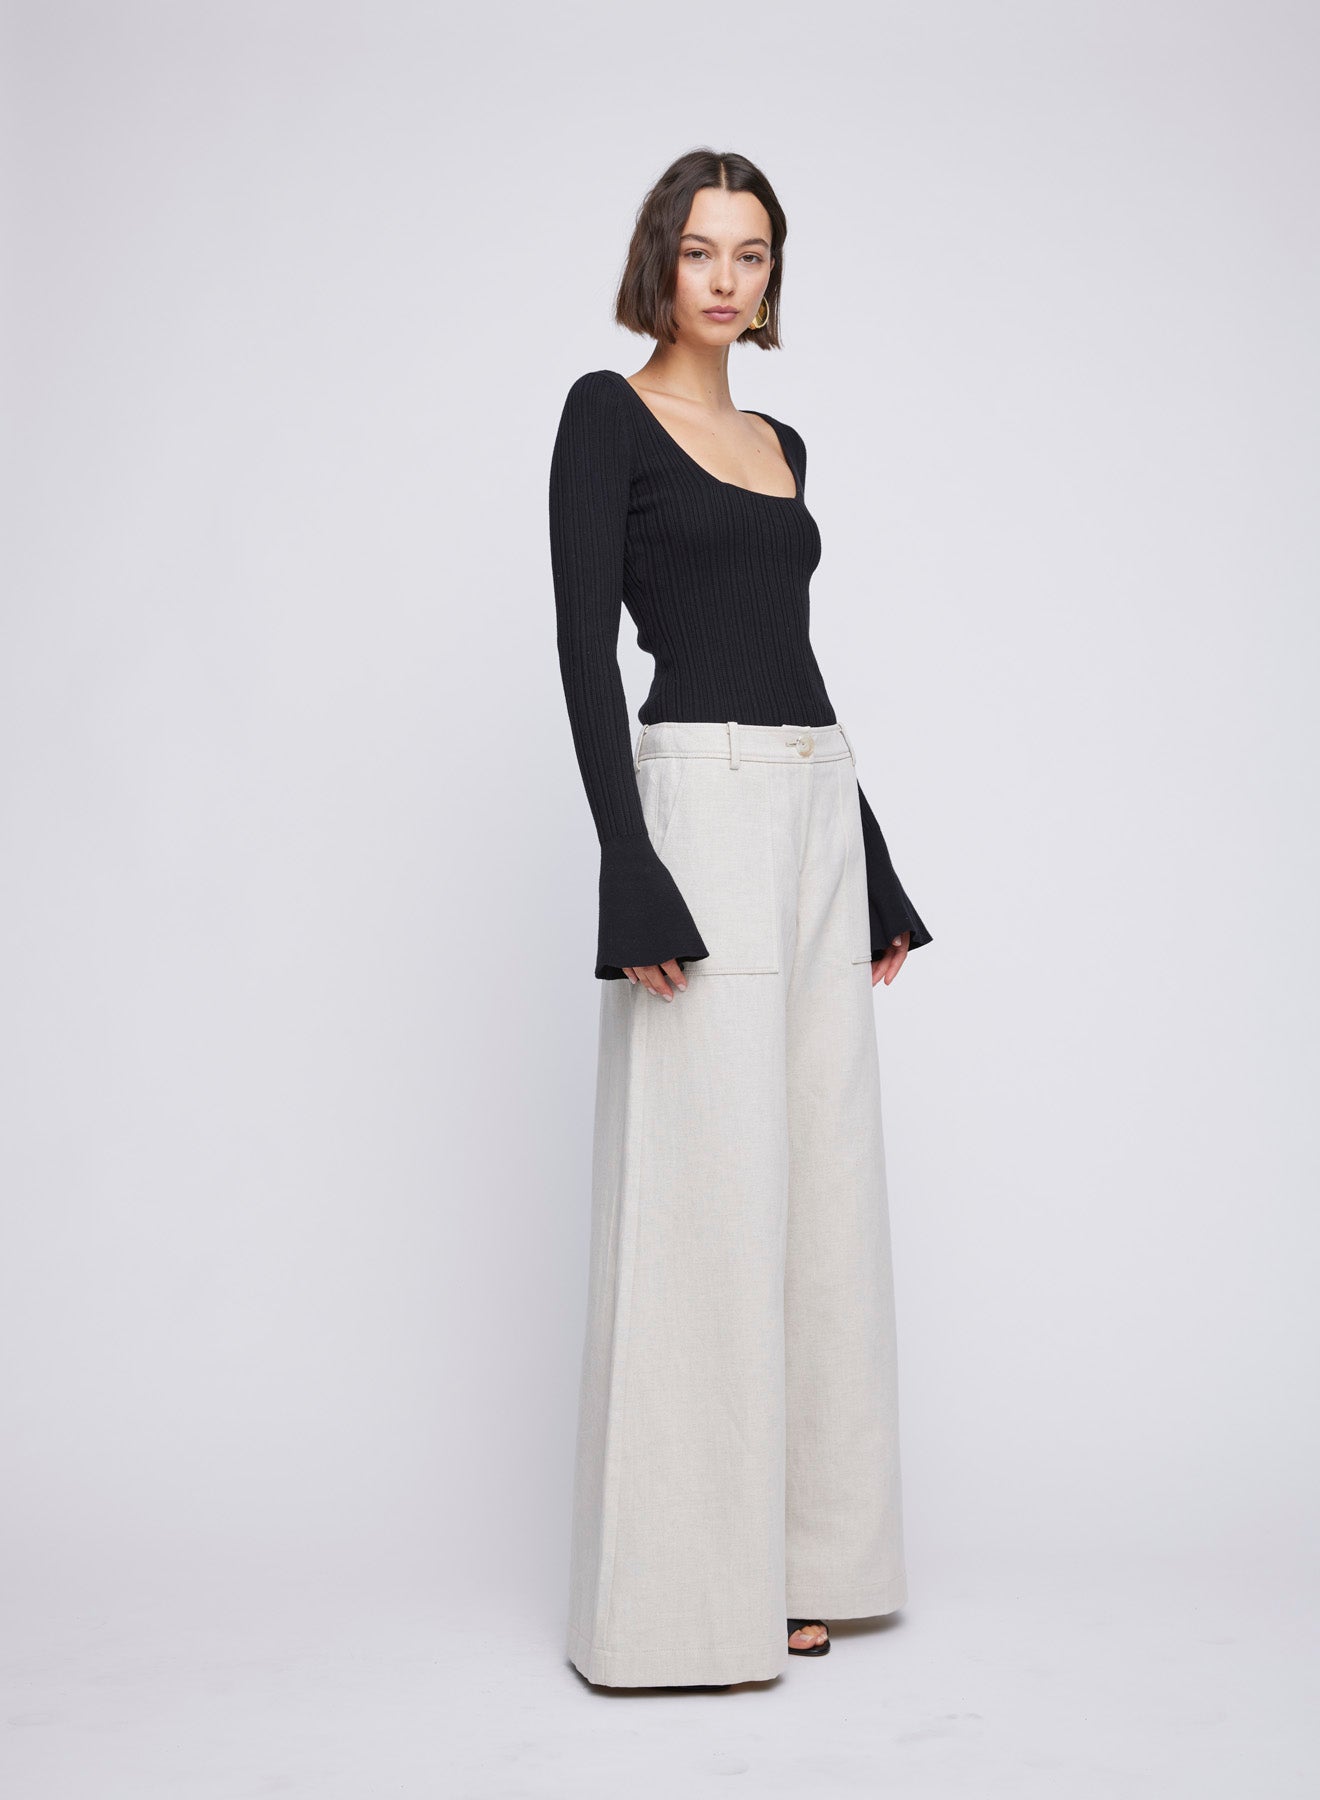 ANNA QUAN Sloane Pants in canvas cloud material. Wide-leg fit, mid-rise, front button and zip closure. Ideal for a timeless and versatile look.